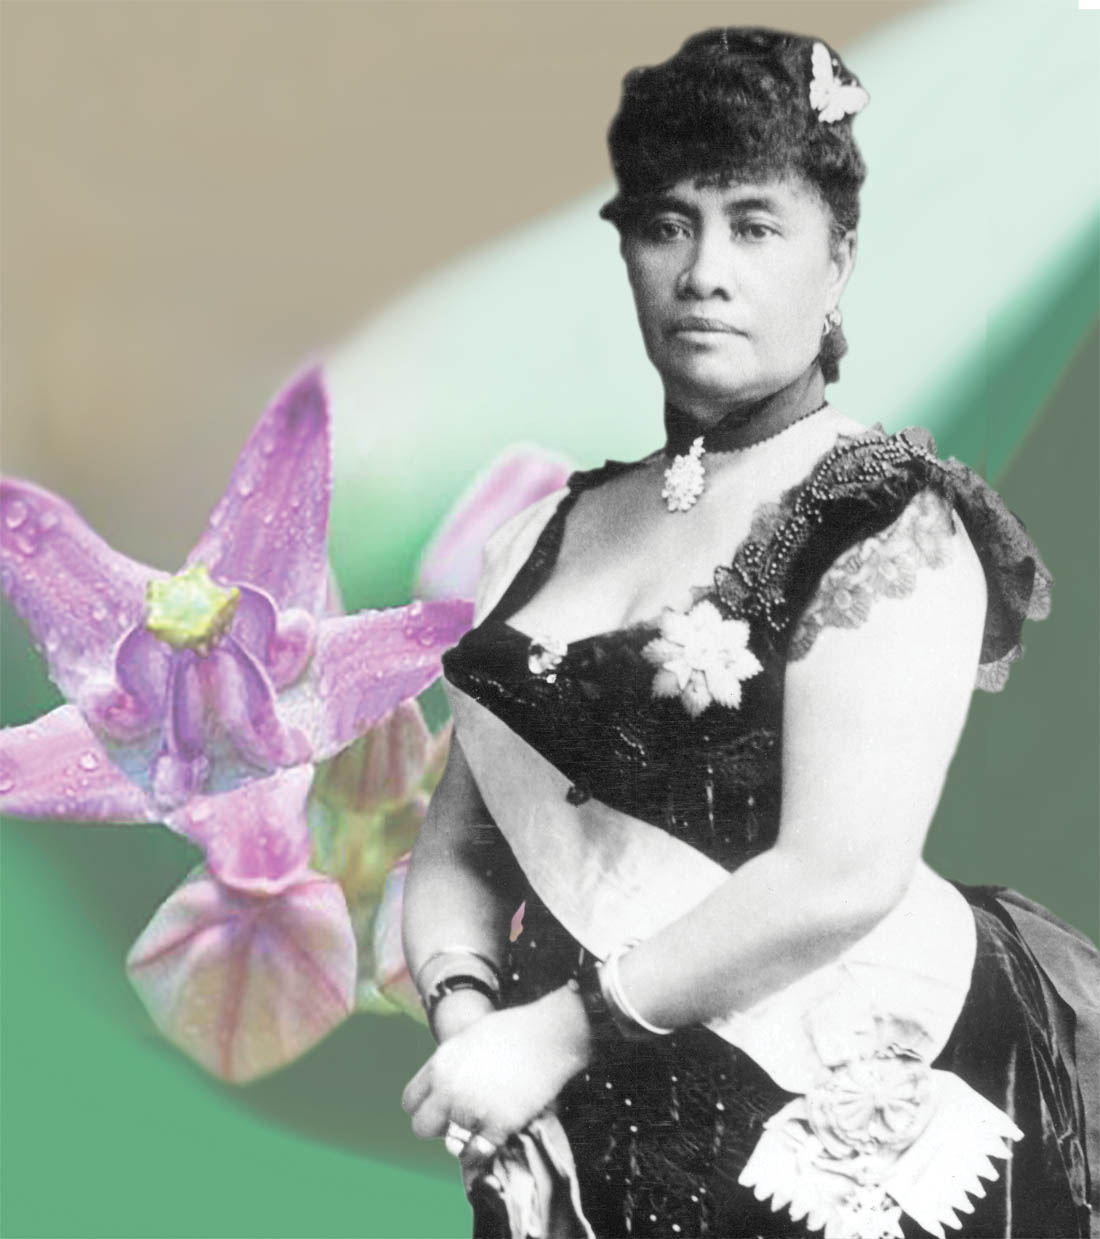 Queen Lili‘uokalani and her favorite flower, the crown flower